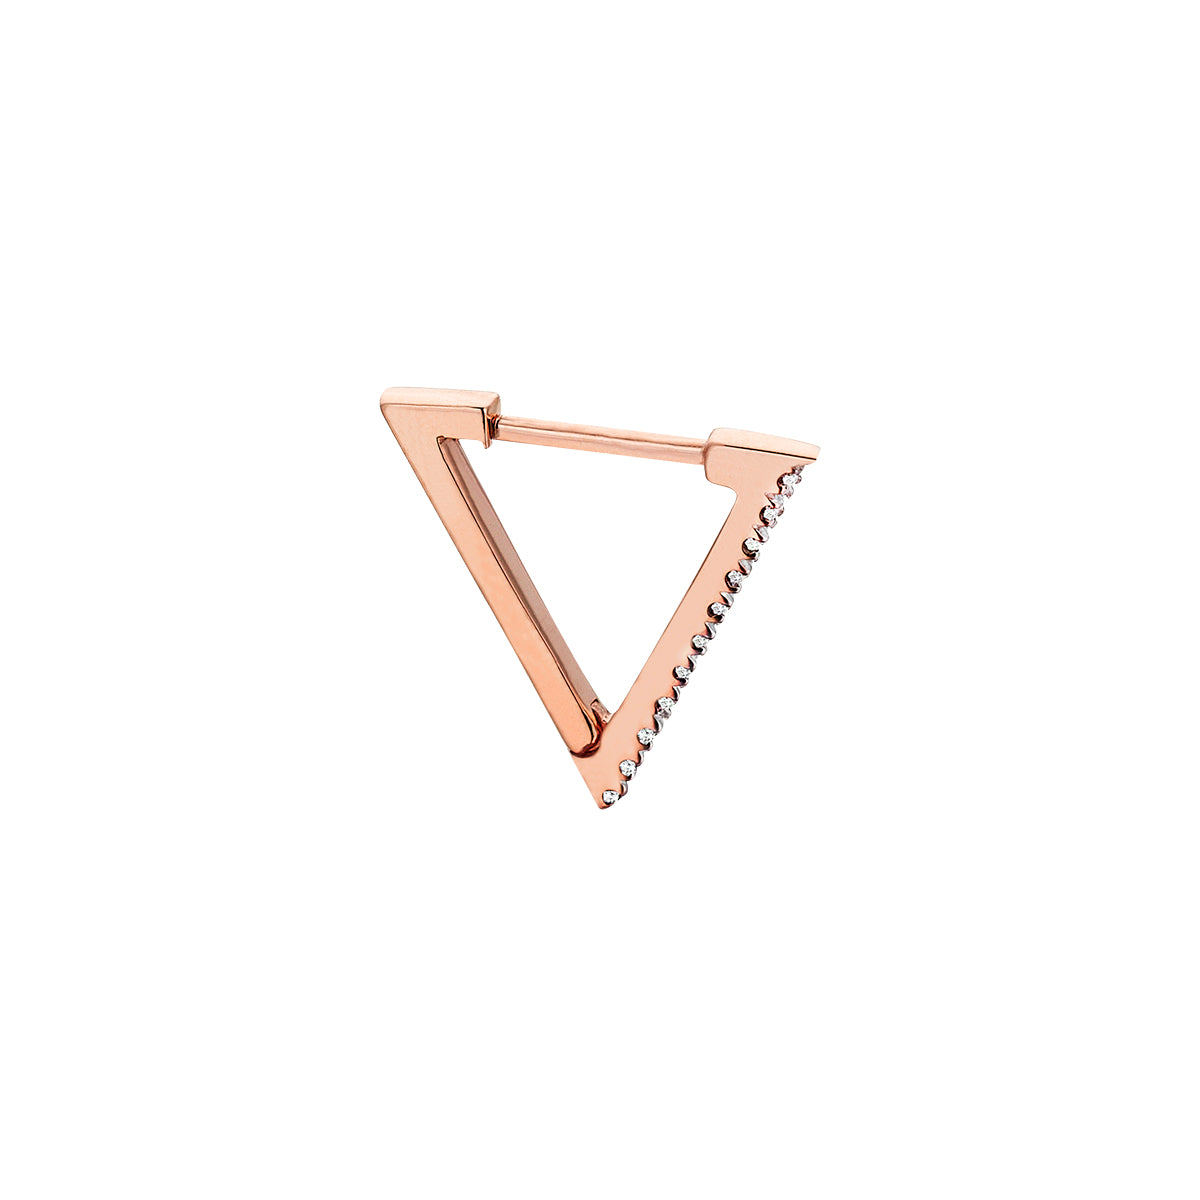 Mini Triangle Earring in Rose Gold - Her Story Shop